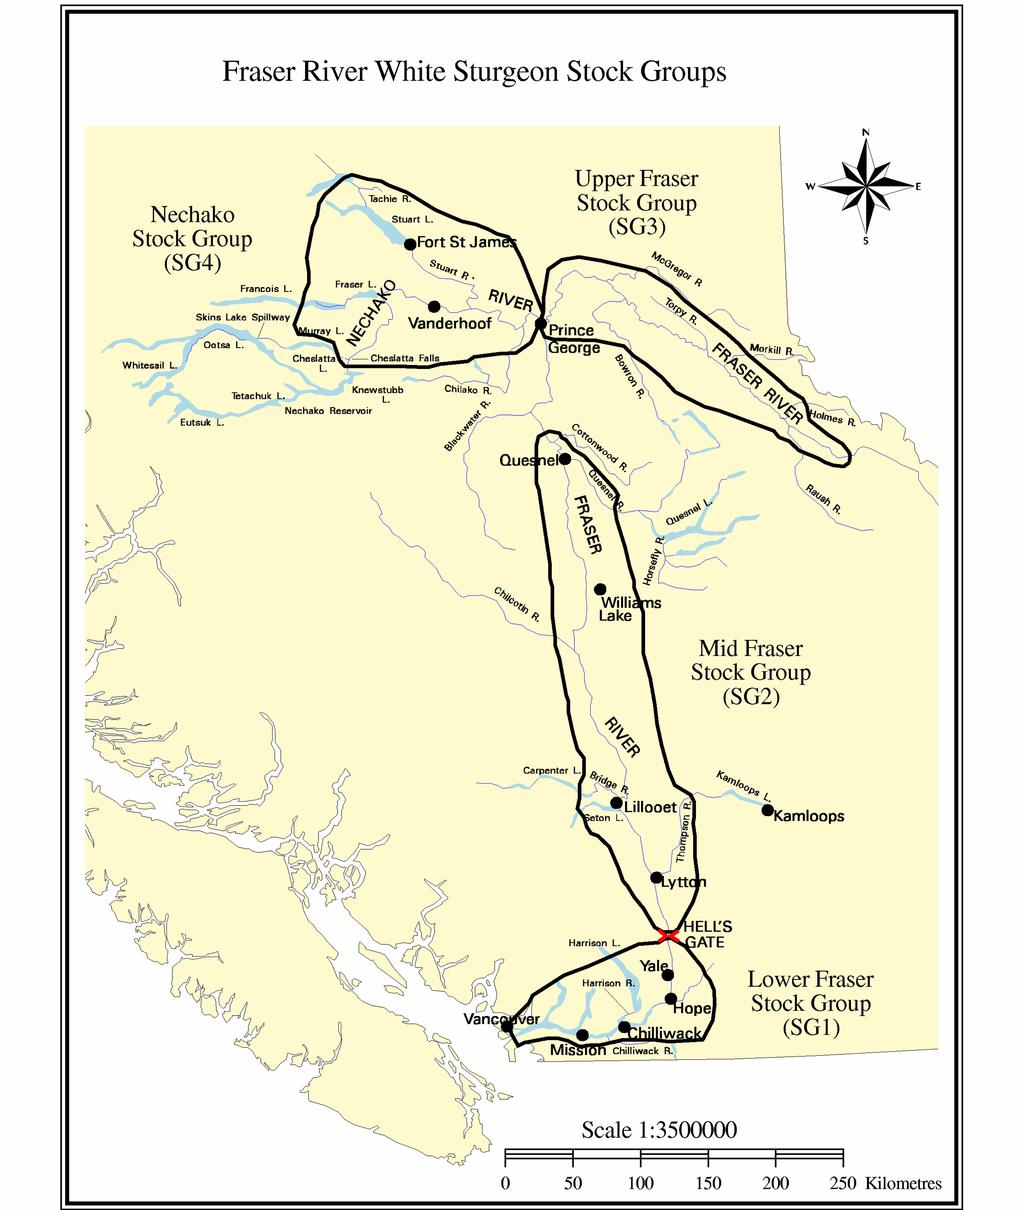 Fraser River White Sturgeon Conservation Plan Figure 2. Map of the Fraser River basin showing the approximate ranges for each of the white sturgeon stock groups.